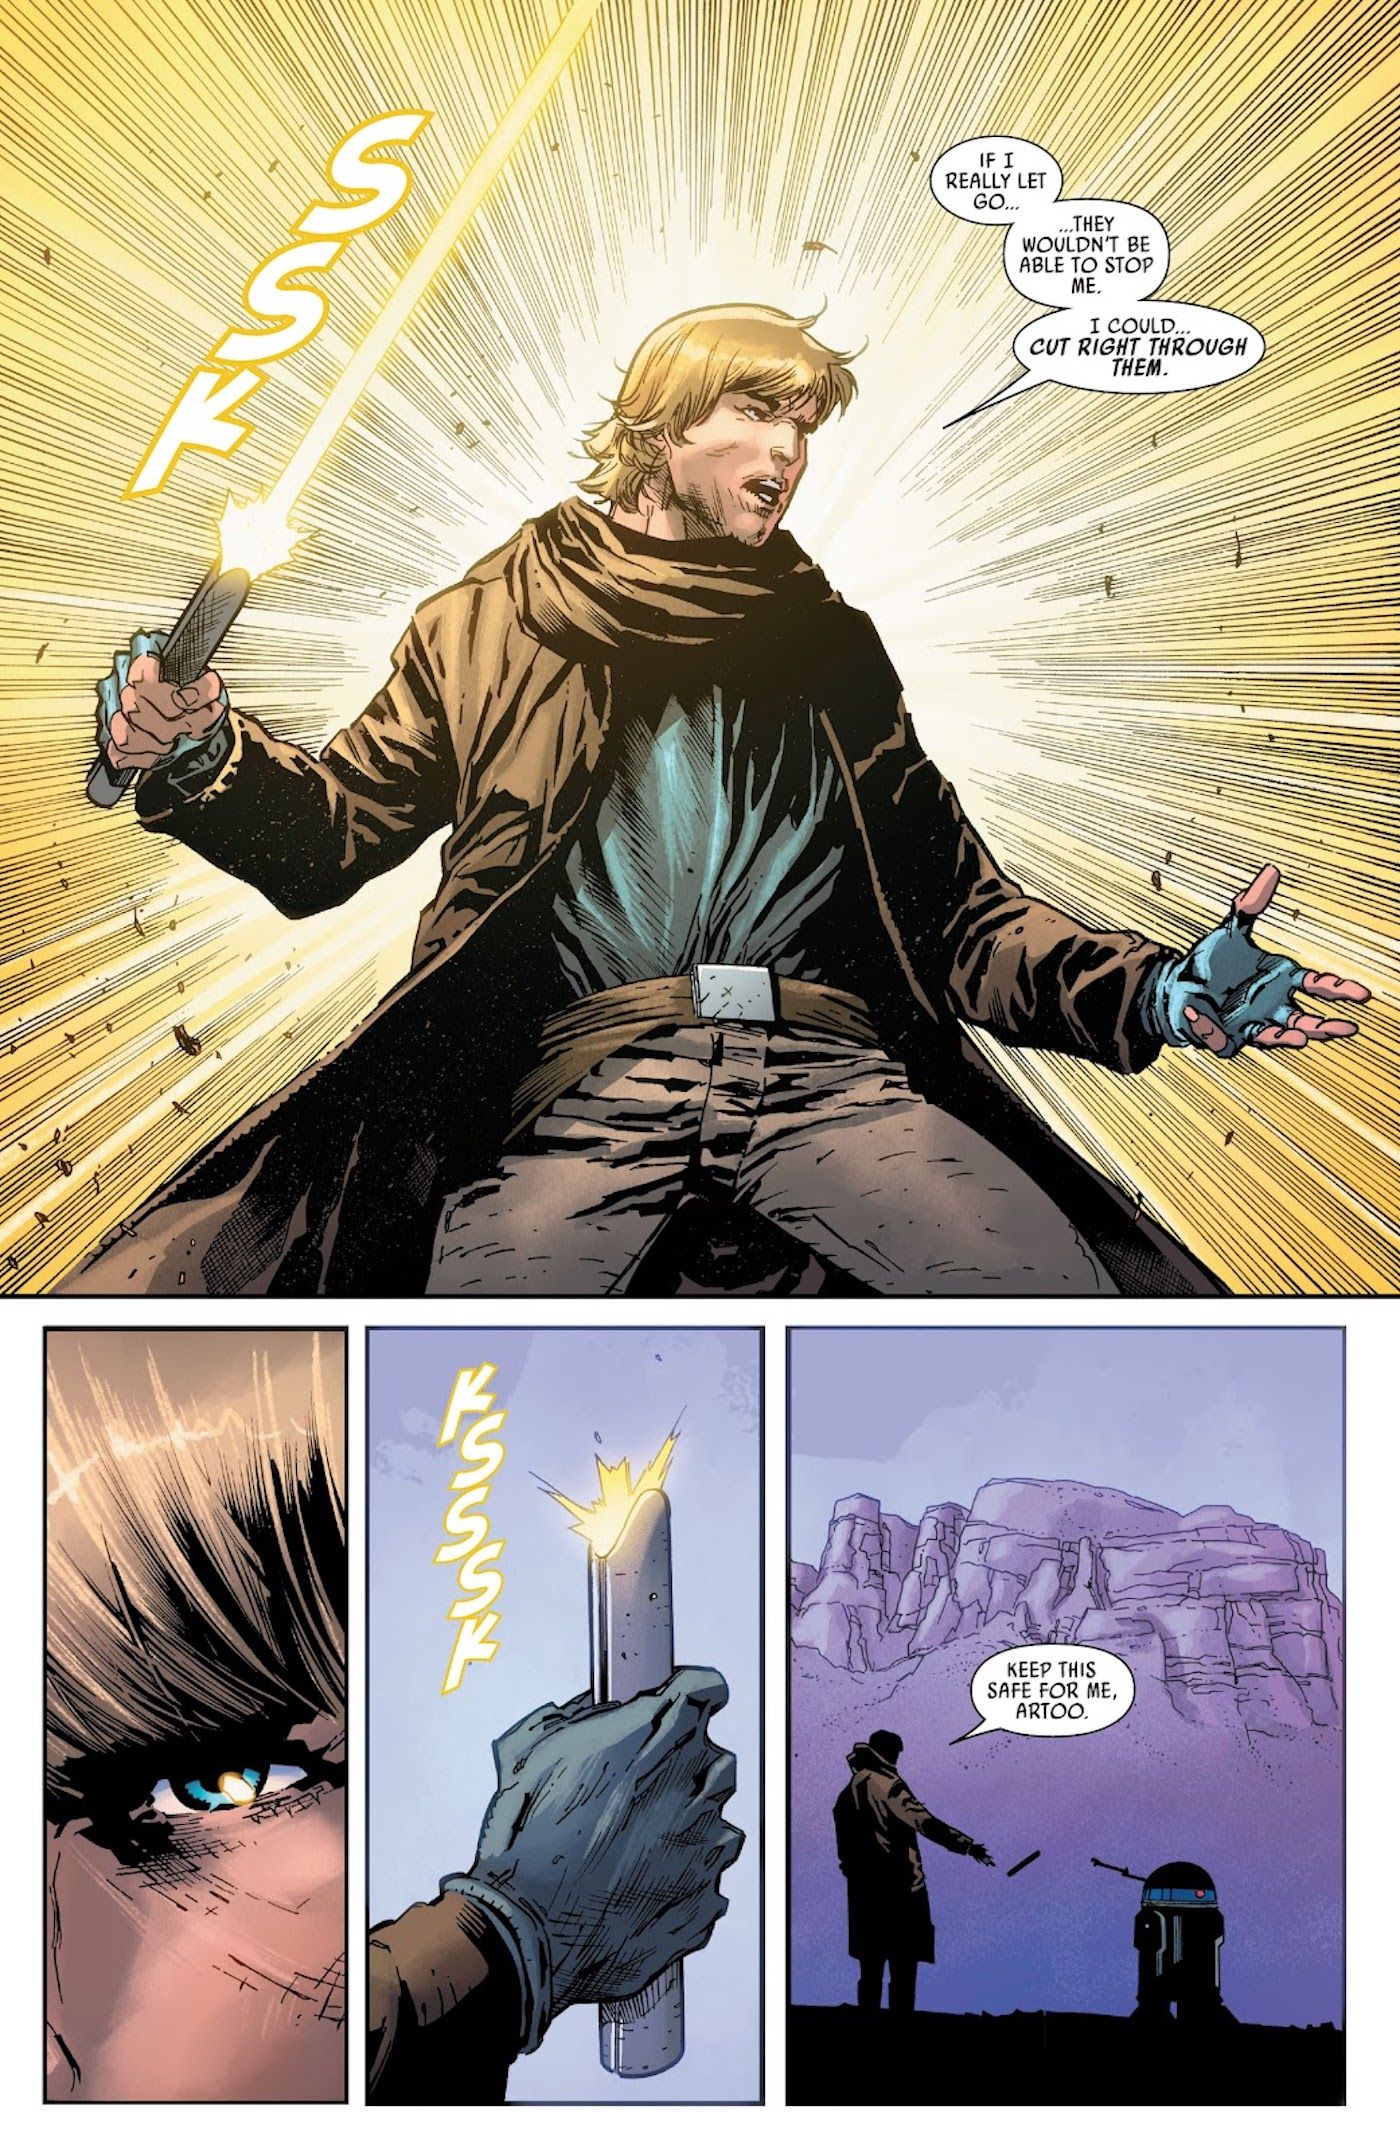 Luke Throwing Away His Lightsaber Was Way More Heroic The First Time